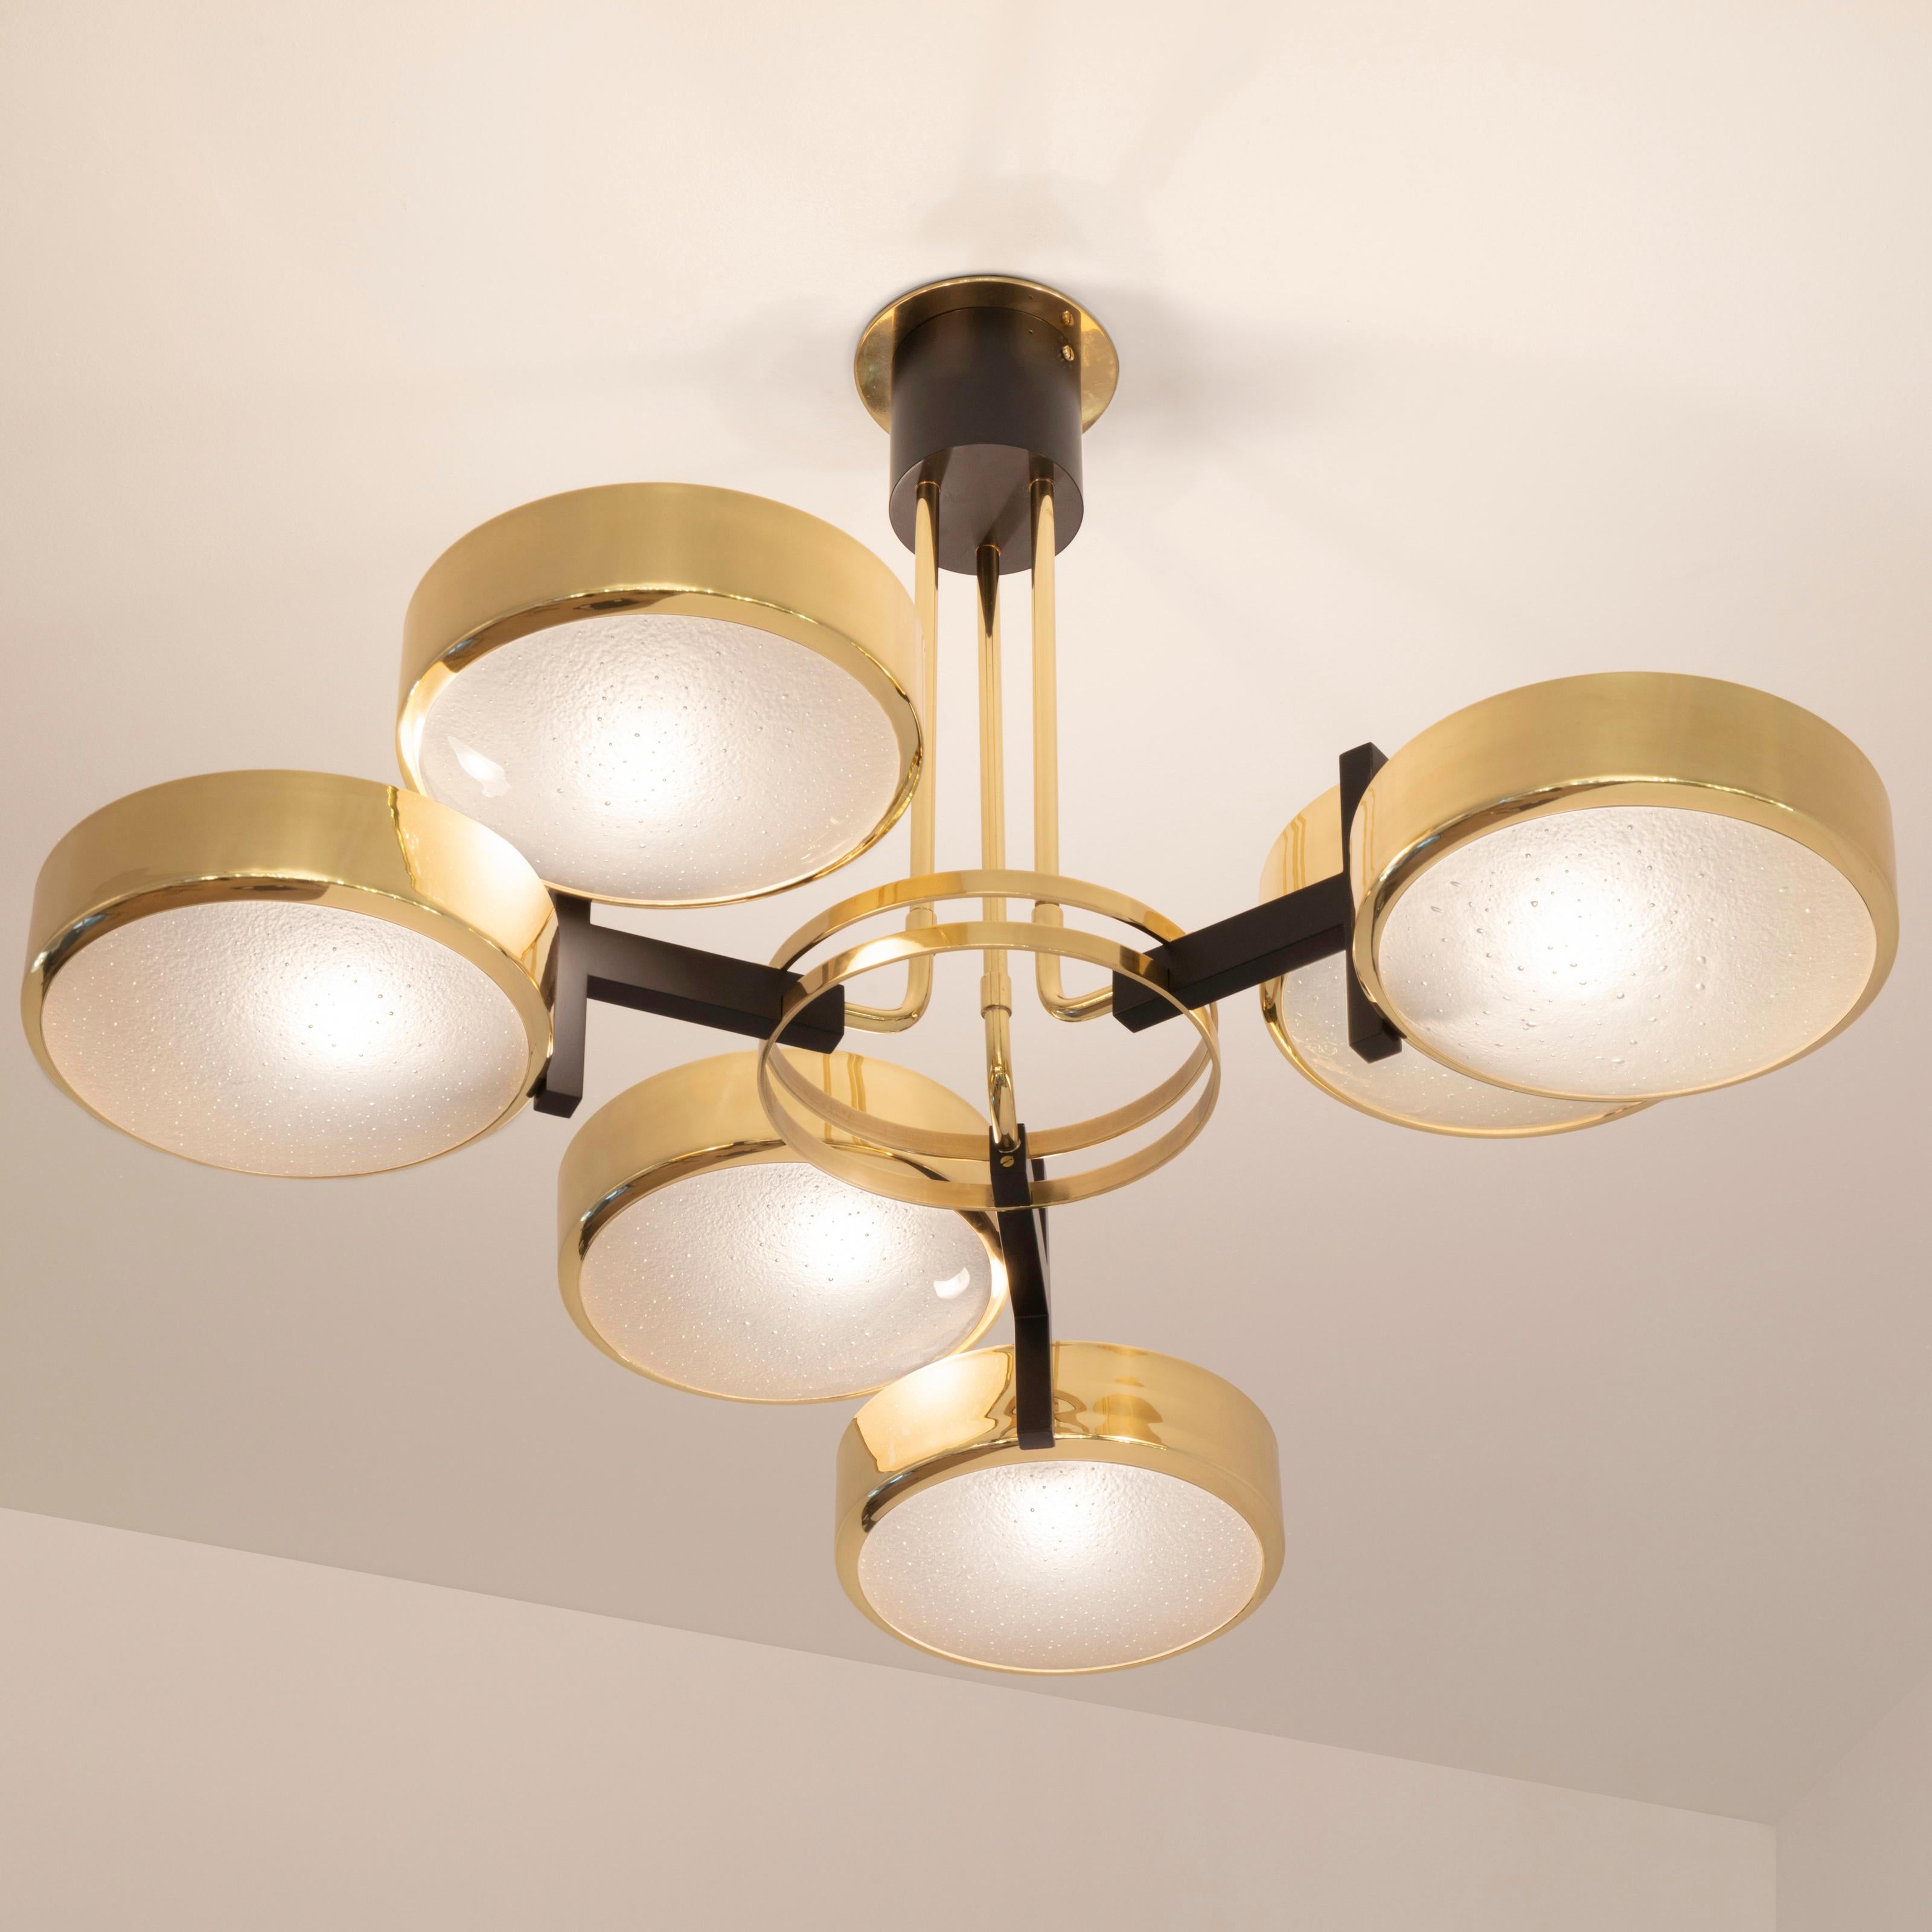 Eclissi Ceiling Light by Gaspare Asaro- Satin Brass and Satin Nickel Finish For Sale 1